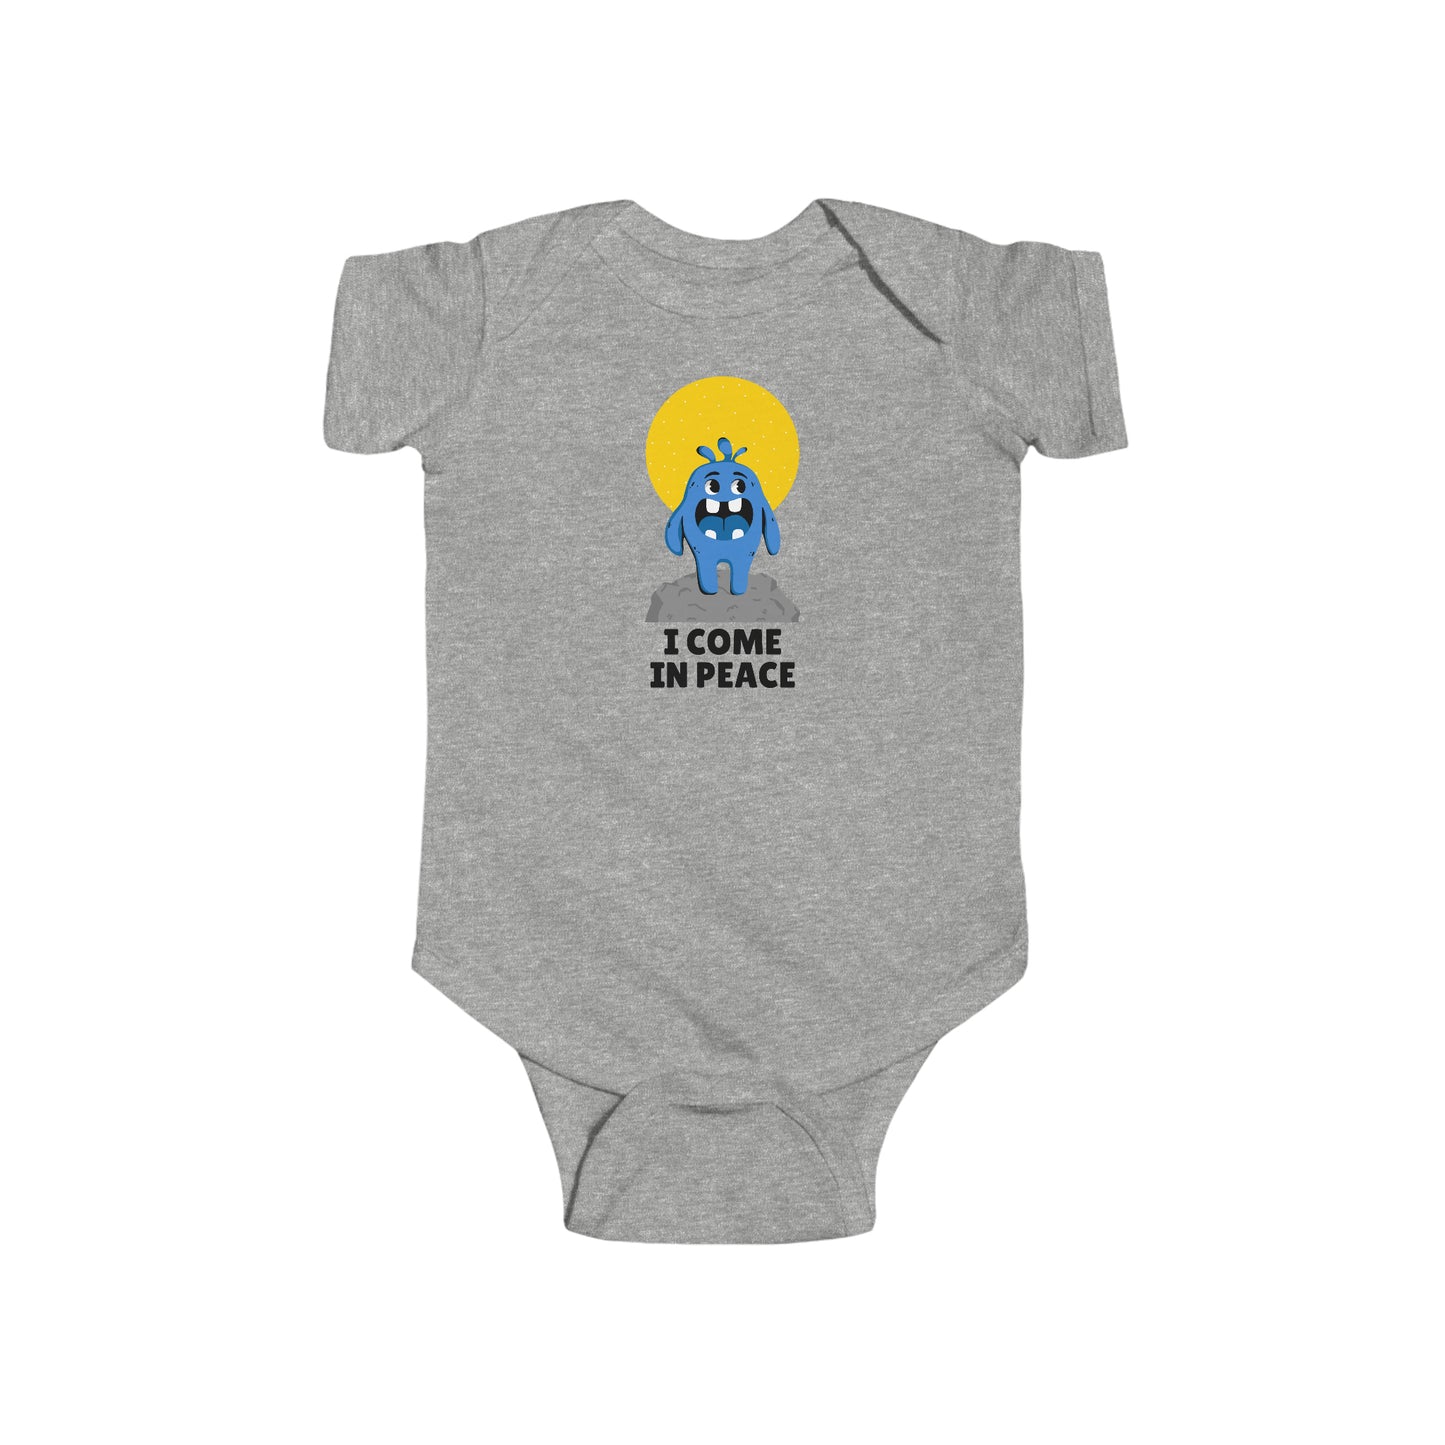 " I come in peace" Infant Fine Jersey Bodysuit